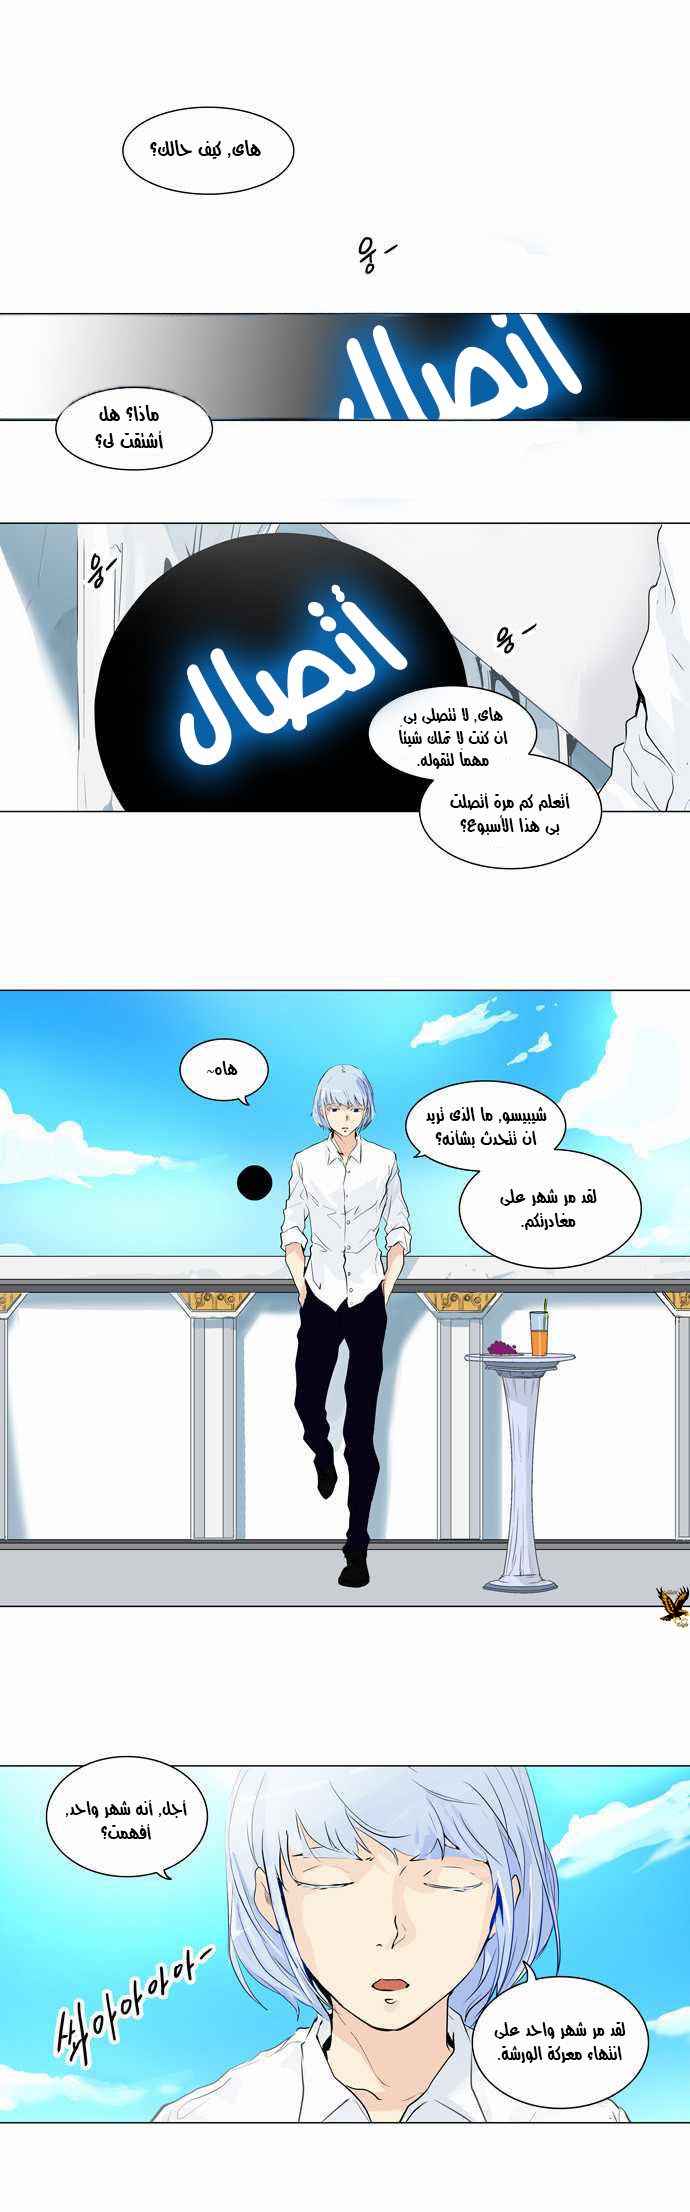 Tower of God 2: Chapter 111 - Page 1